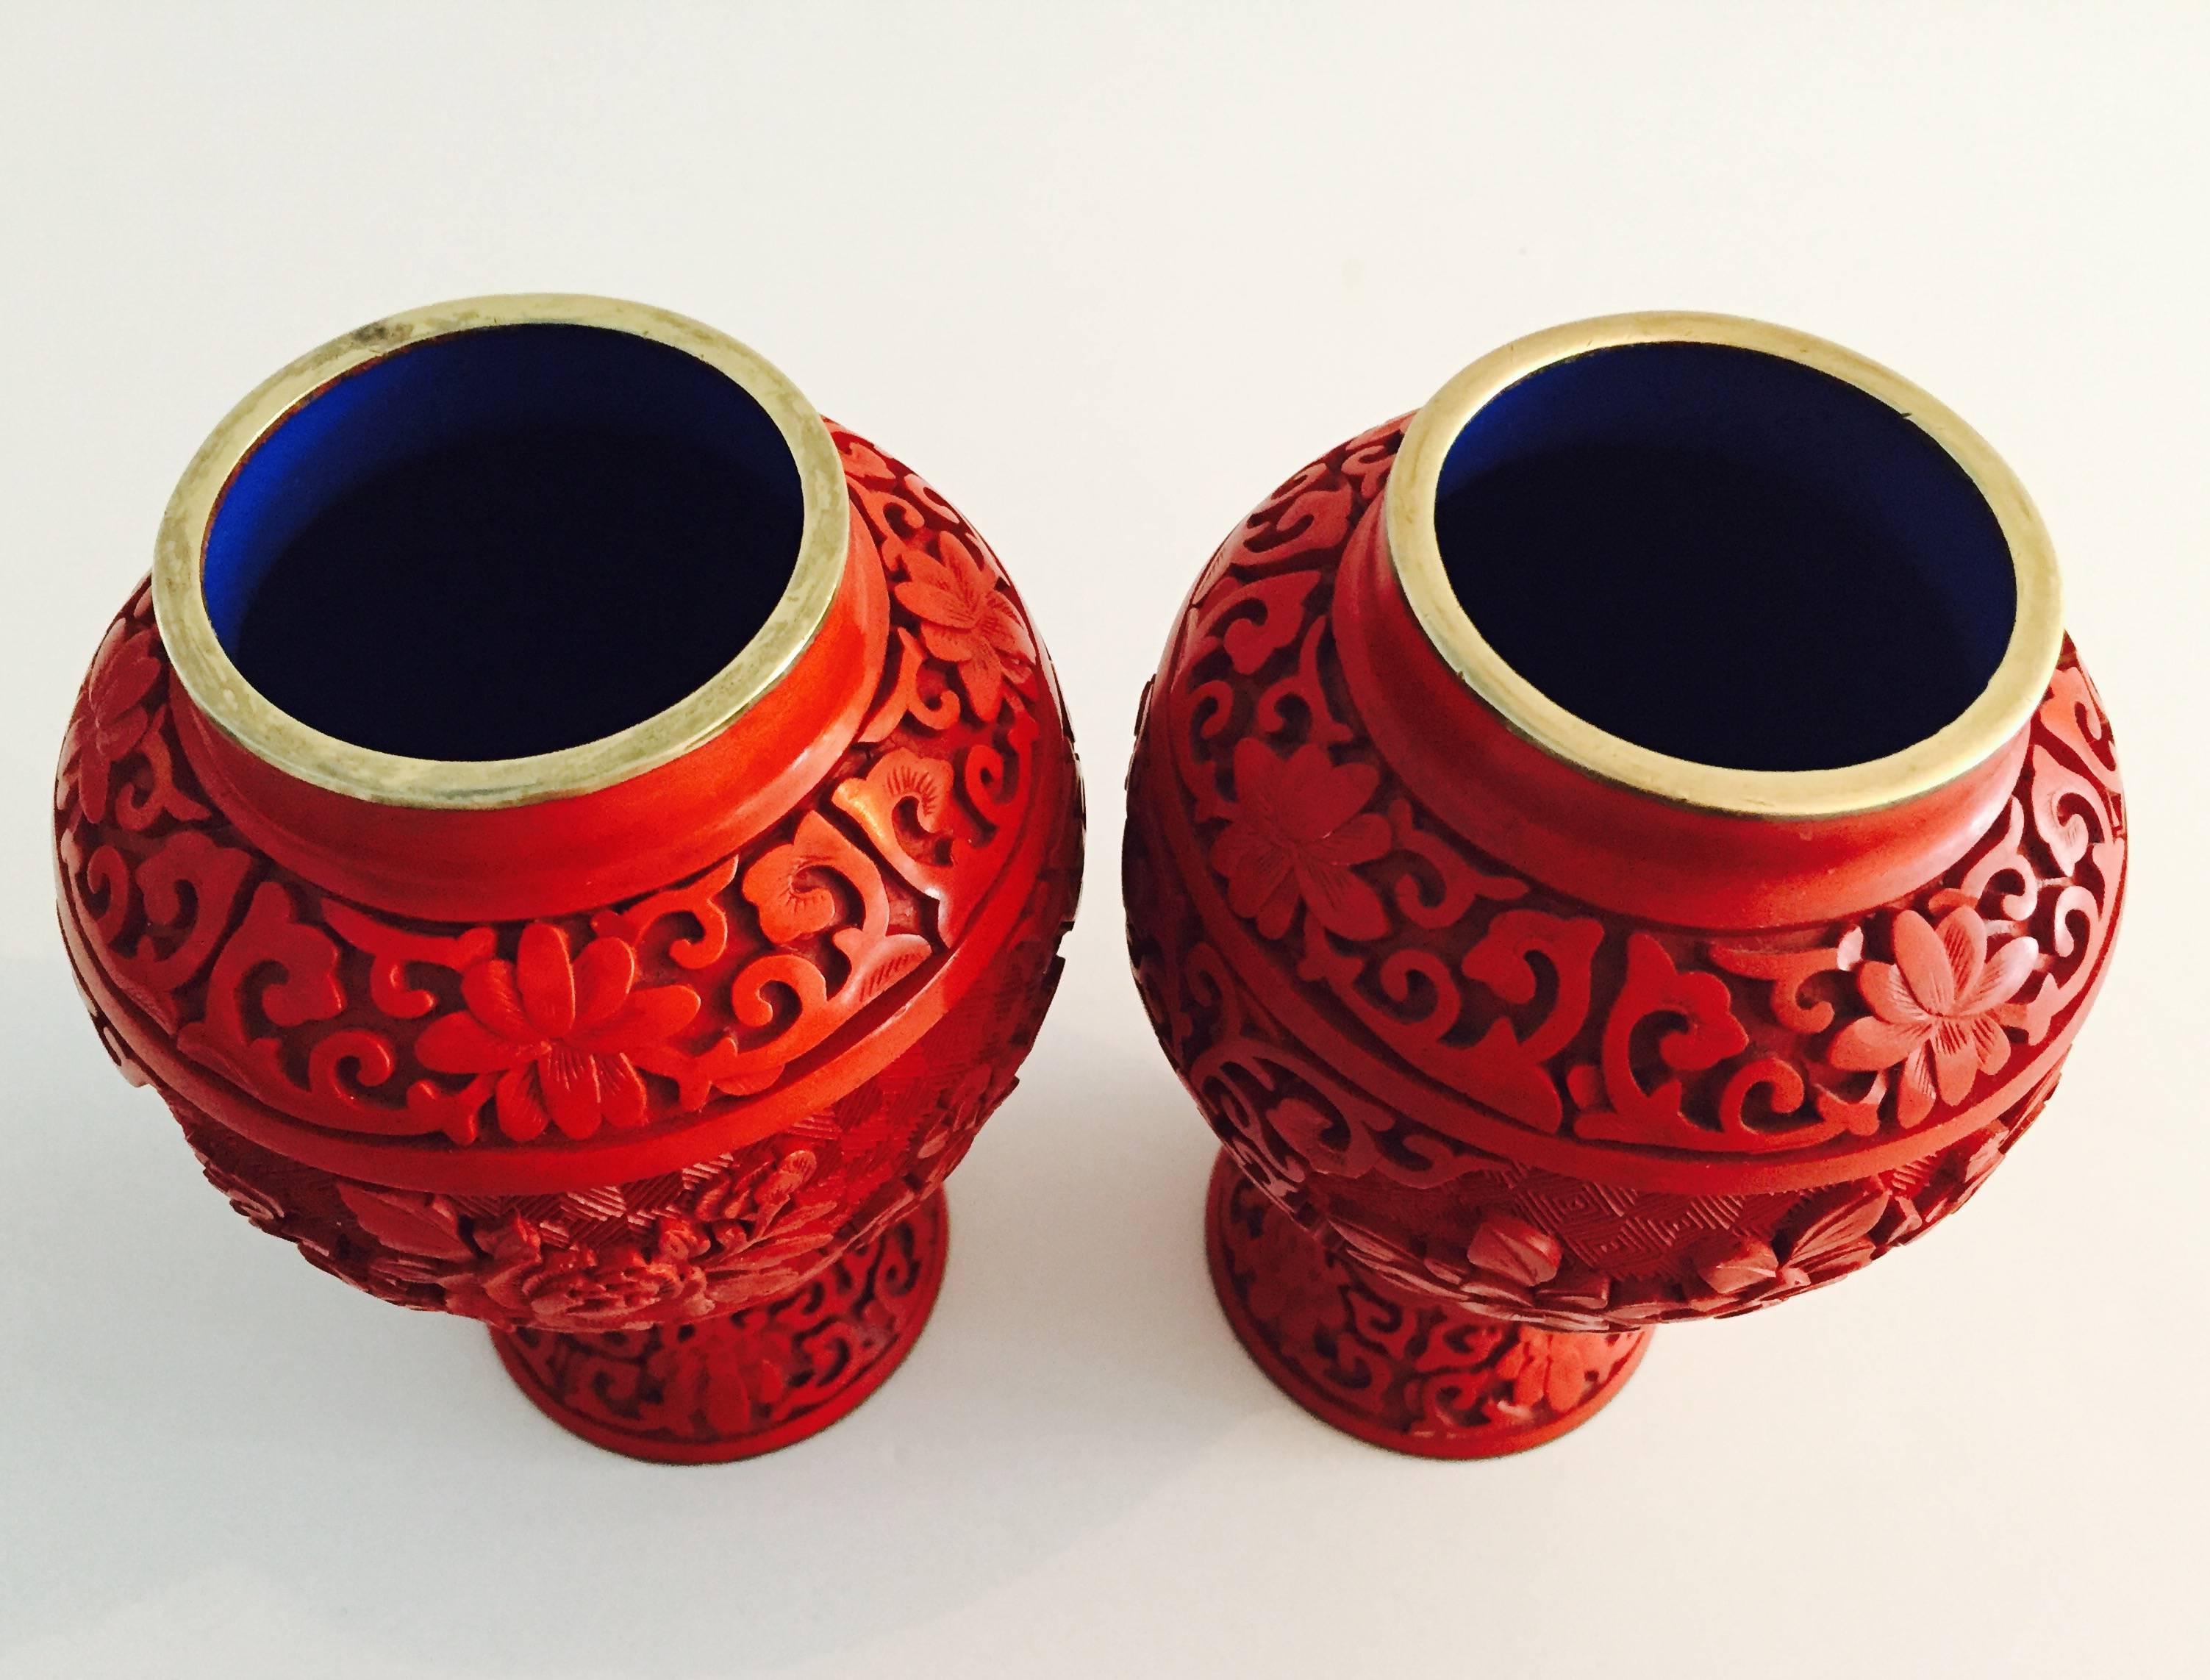 20th Century Pair of Chinese Cinnabar and Cloisonné Lidded Jars